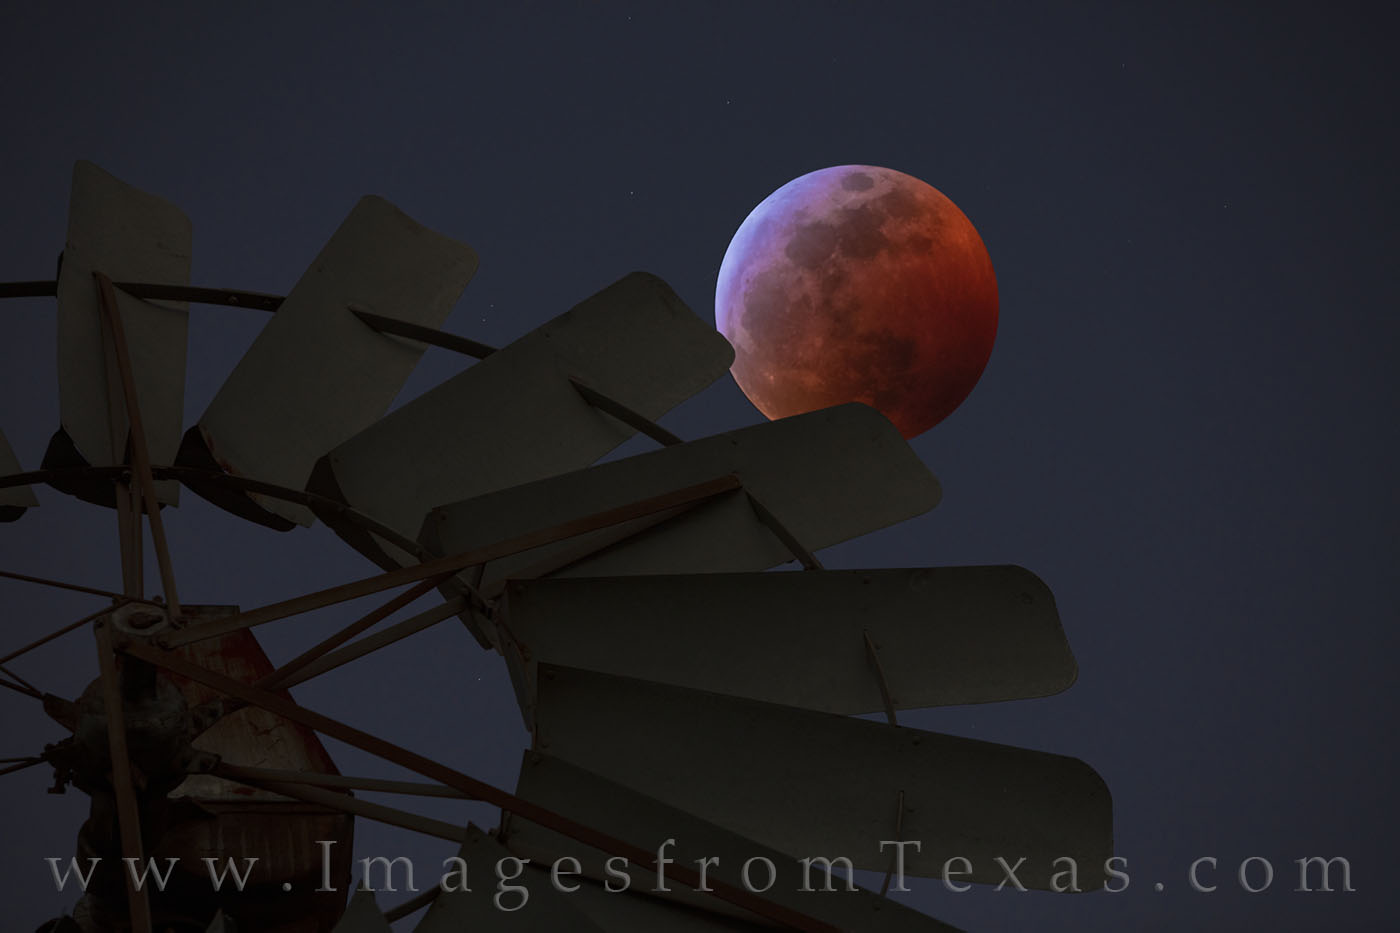 On a cold January night, the rare Super Blood Wolf Moon hangs in the dark sky over the Texas Hill Country. At its closest point...